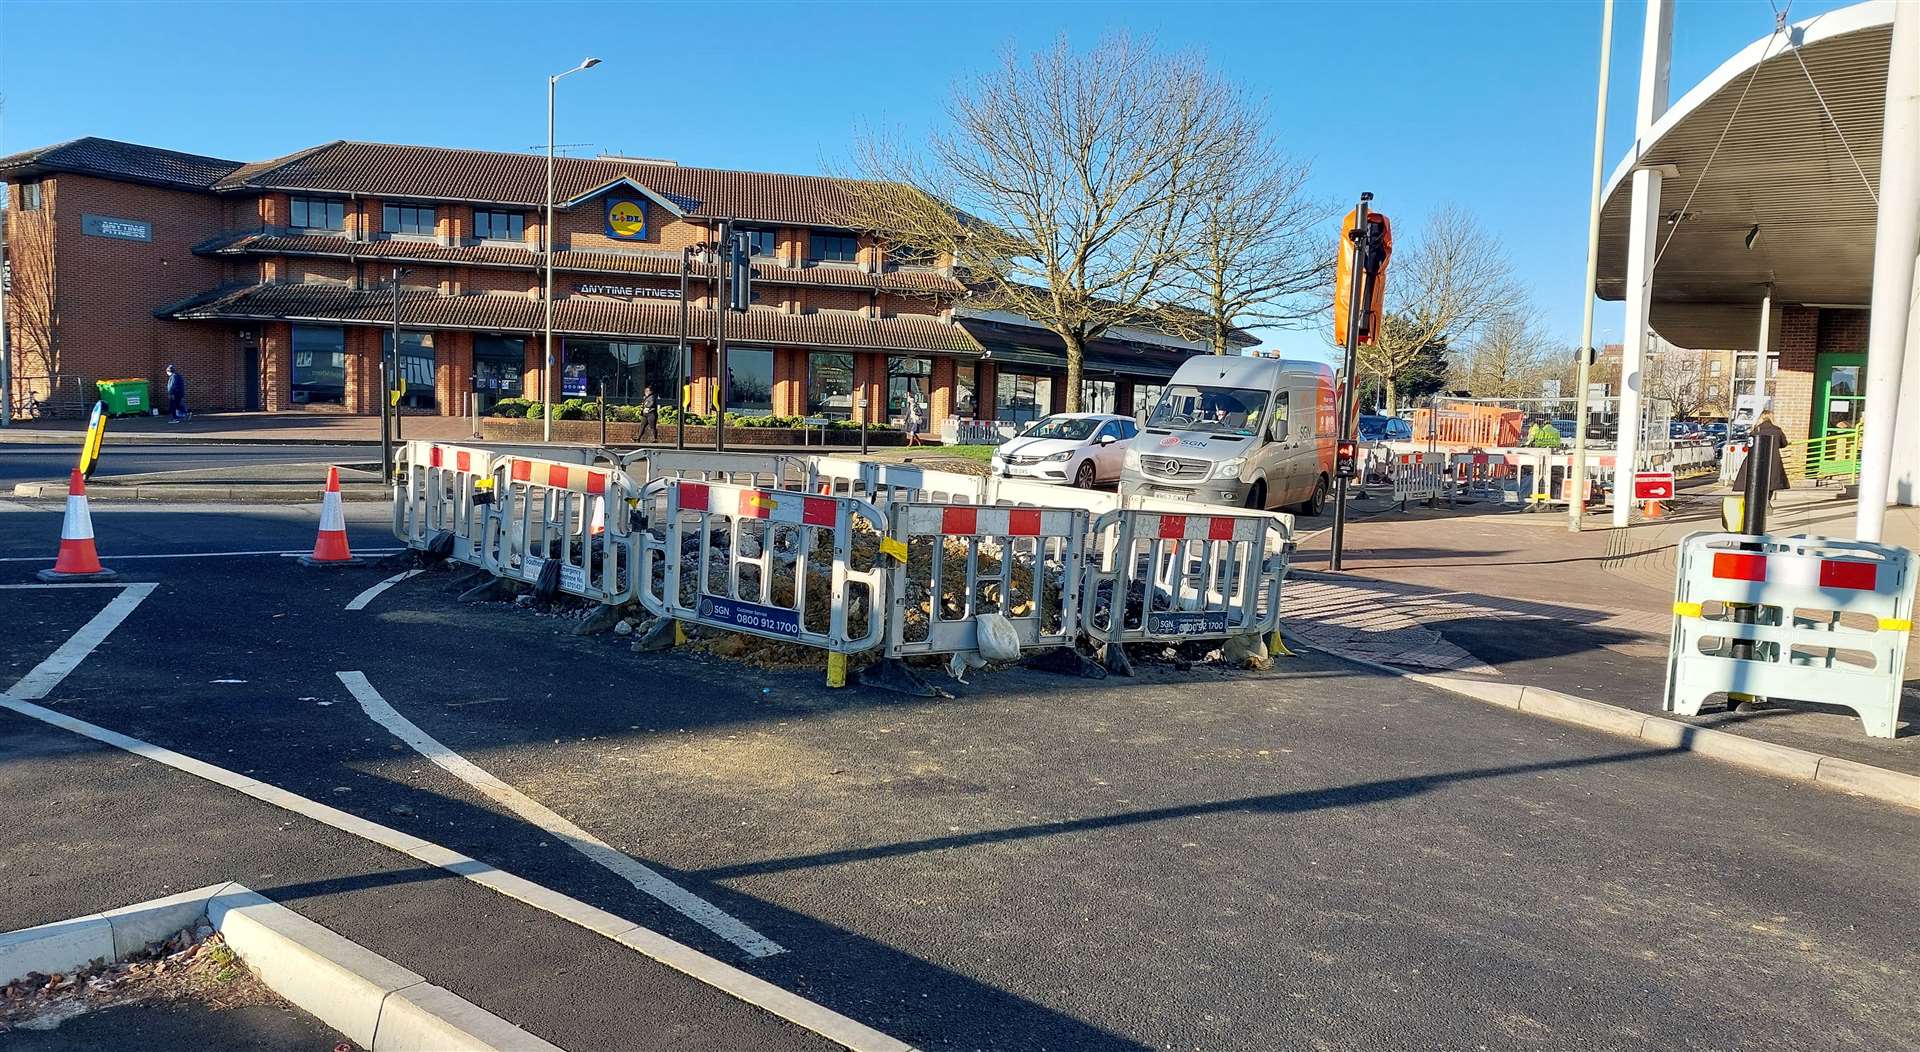 Repairs to New Street are taking “longer than planned”, according to SGN